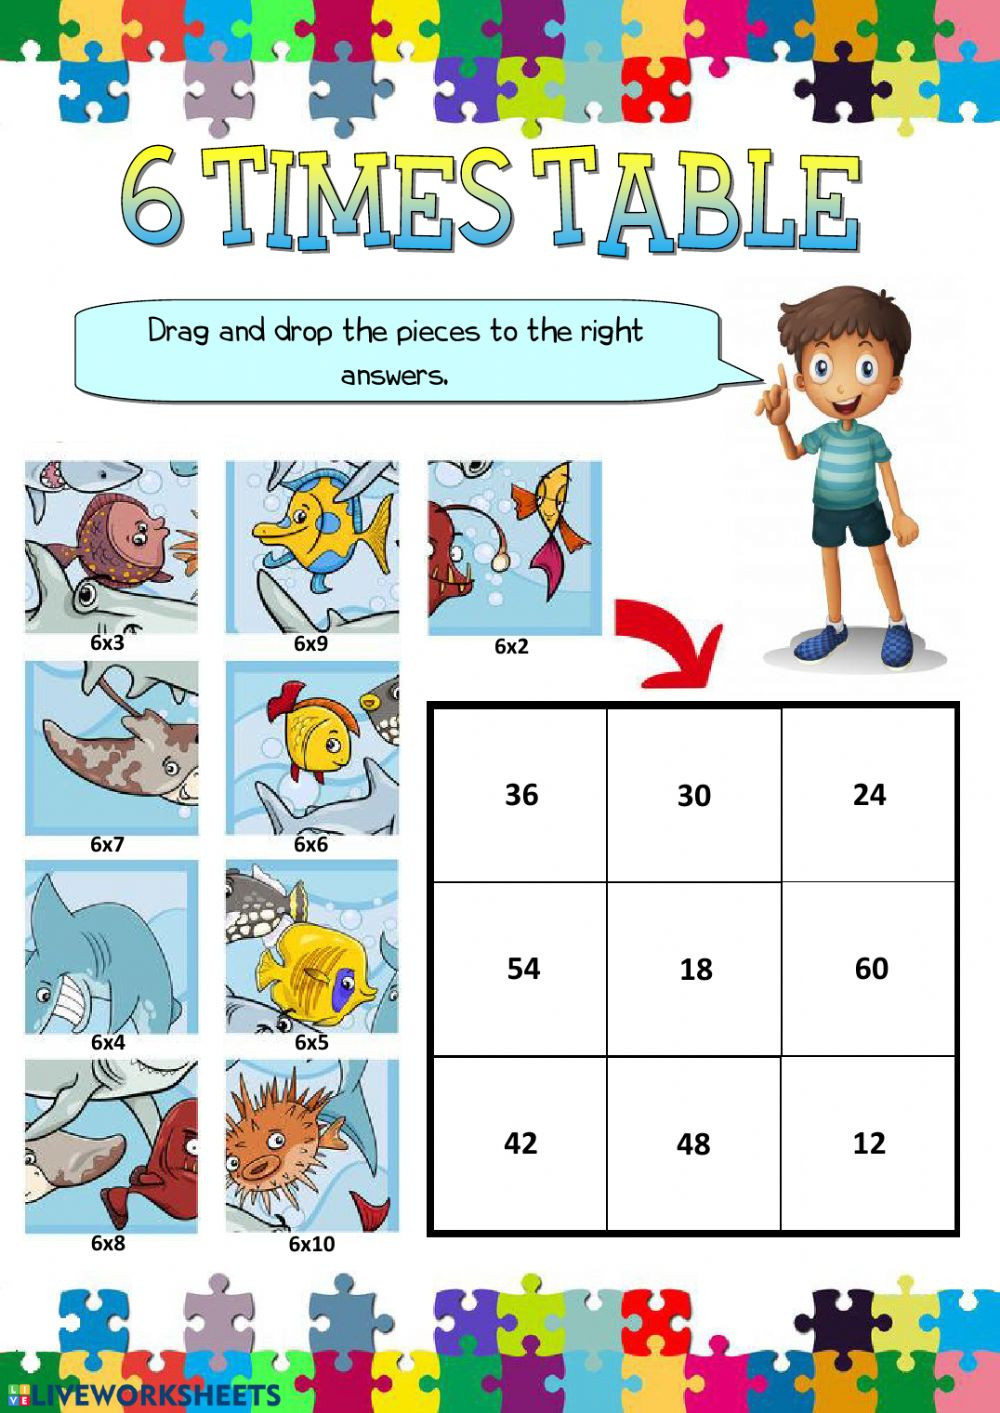 6 Times Table Worksheet 6 Times Table Interactive Worksheet